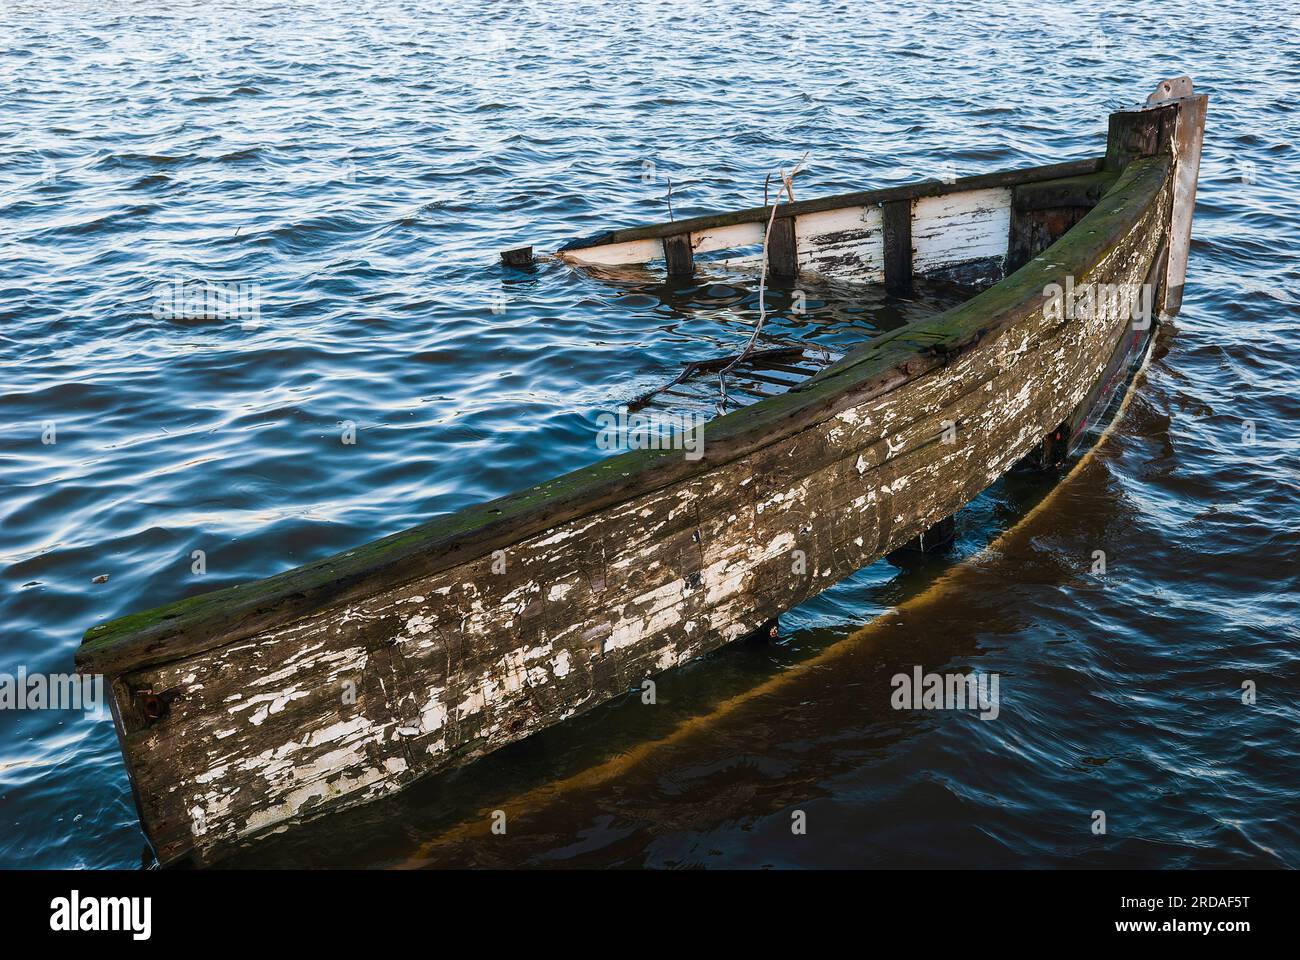 A sunken ship wreck rests at the bottom of a peaceful harbor, its hull shimmering in the sunlit sea. Stock Photo